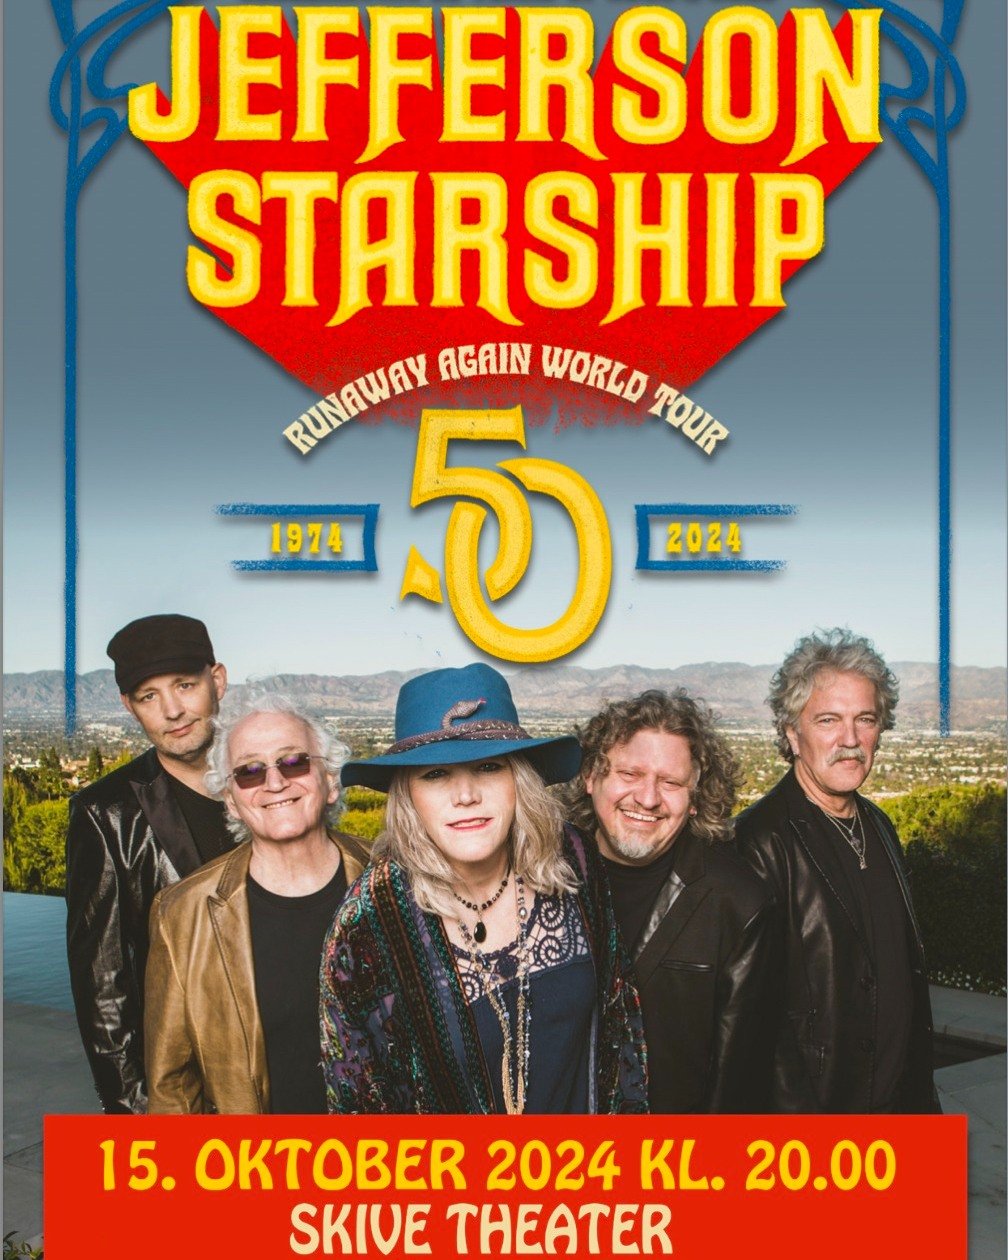 Denmark, get ready to rock! Jefferson Starship is coming to the Skive Theater on October 15th for an electrifying show you won't want to miss! Experience 50 years of hits live in concert. Tickets on sale NOW! 🎶✨ Link in bio